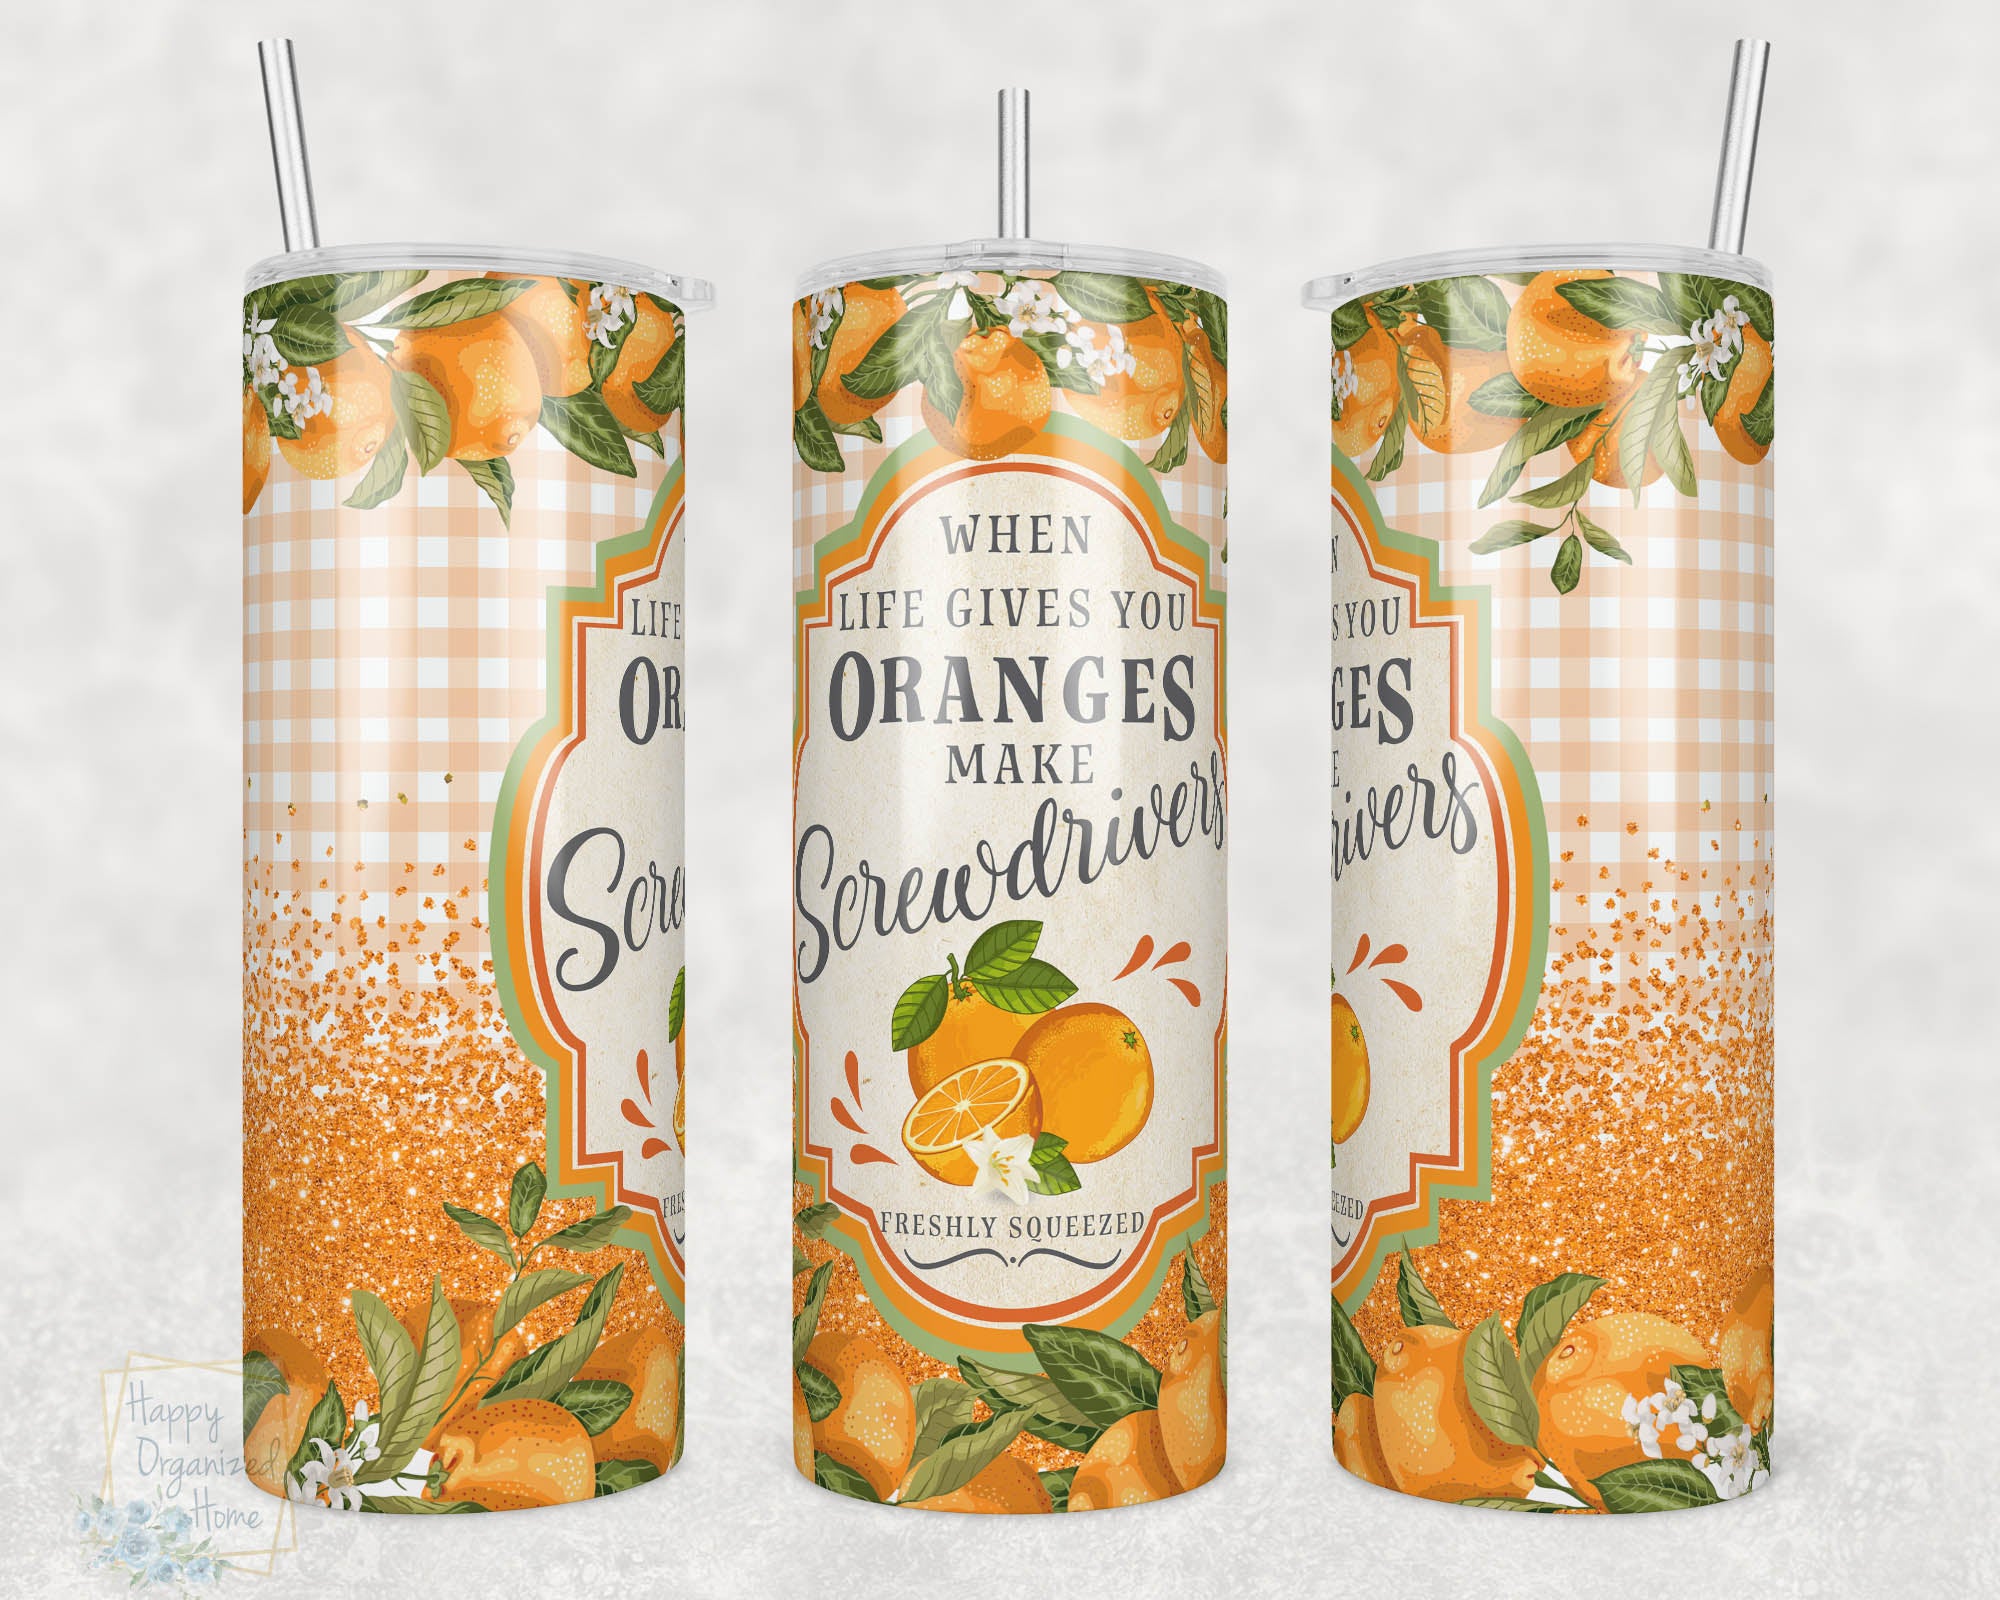 When Life gives you oranges make screwdrivers - 20oz Skinny Insulated tumbler with metal straw